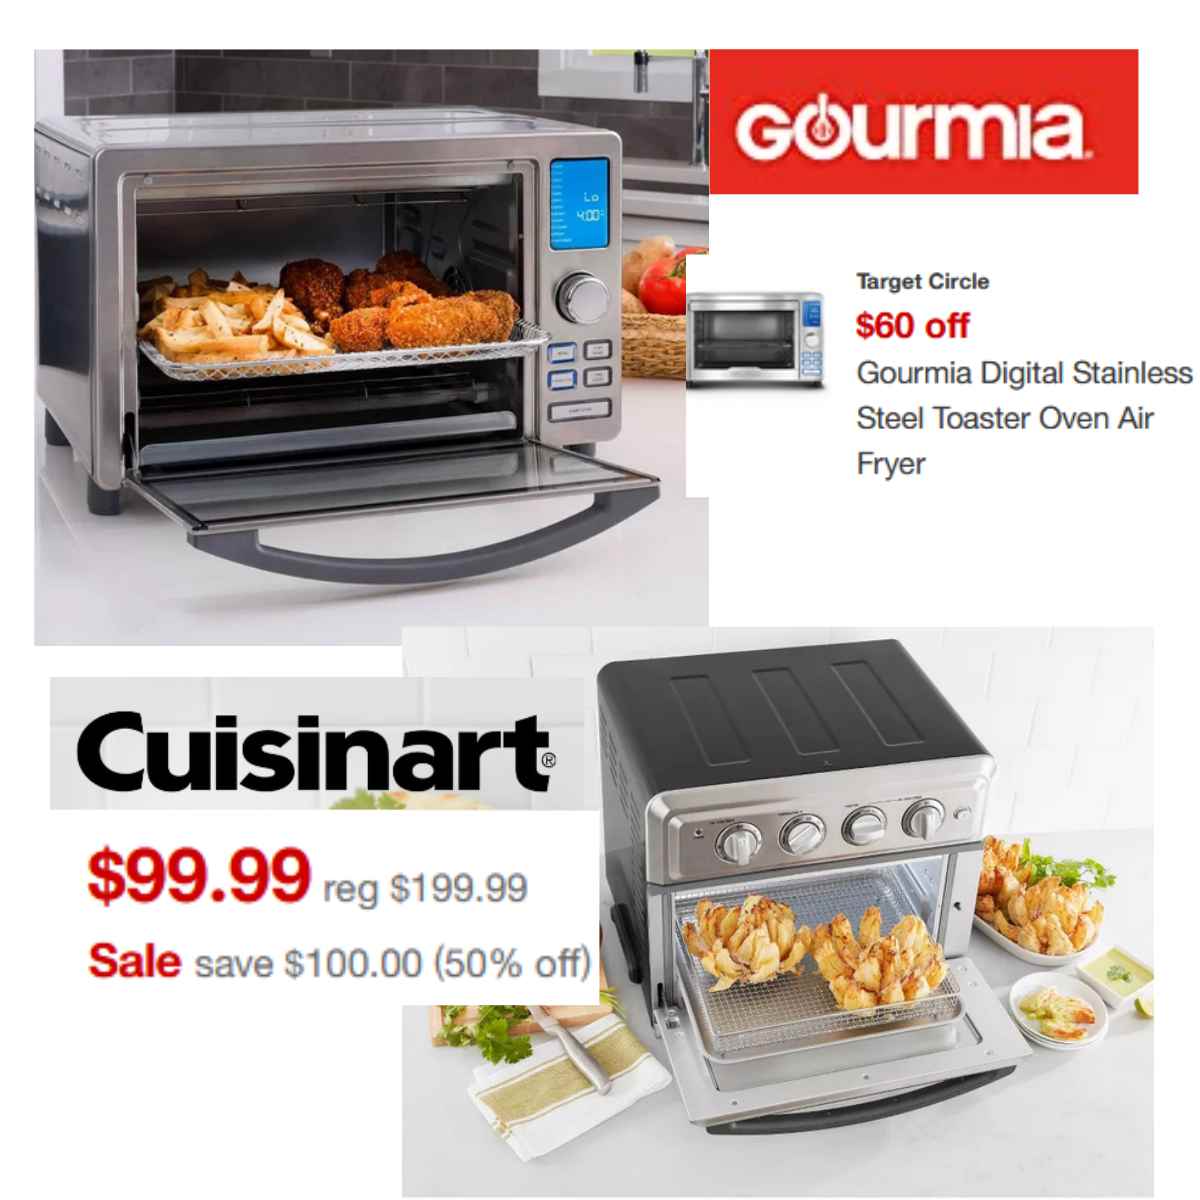 Gourmia Digital Stainless Steel Toaster Oven Air Fryer Stainless Steel 